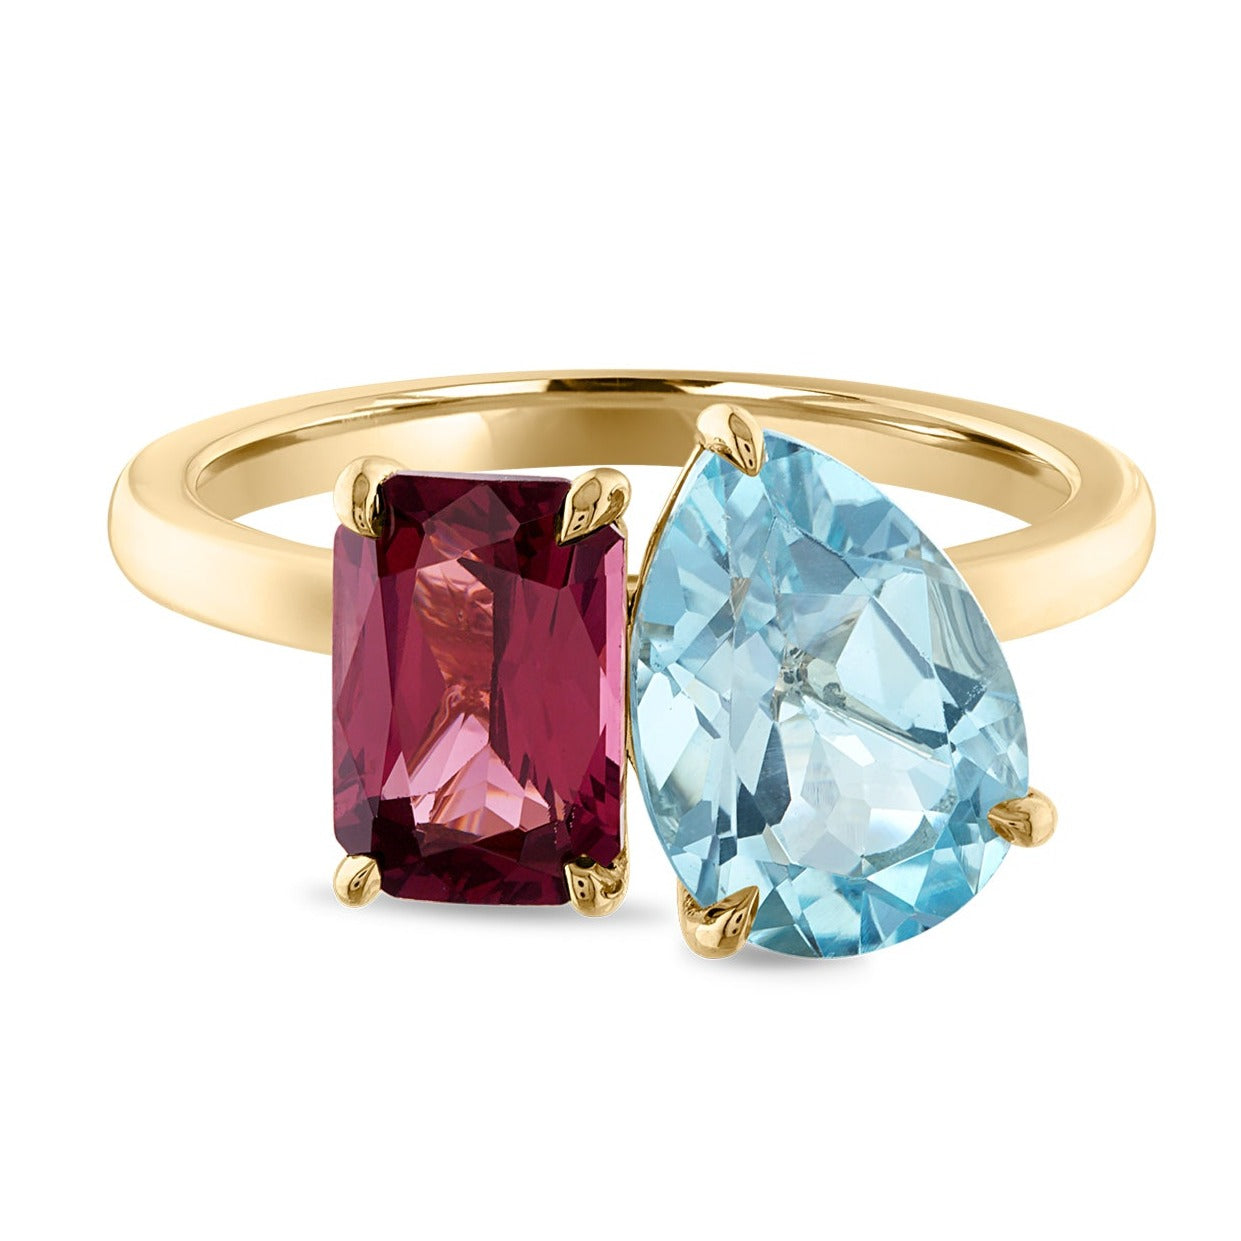 Moi et Toi Style Ring Red Spinel and Blue Topaz